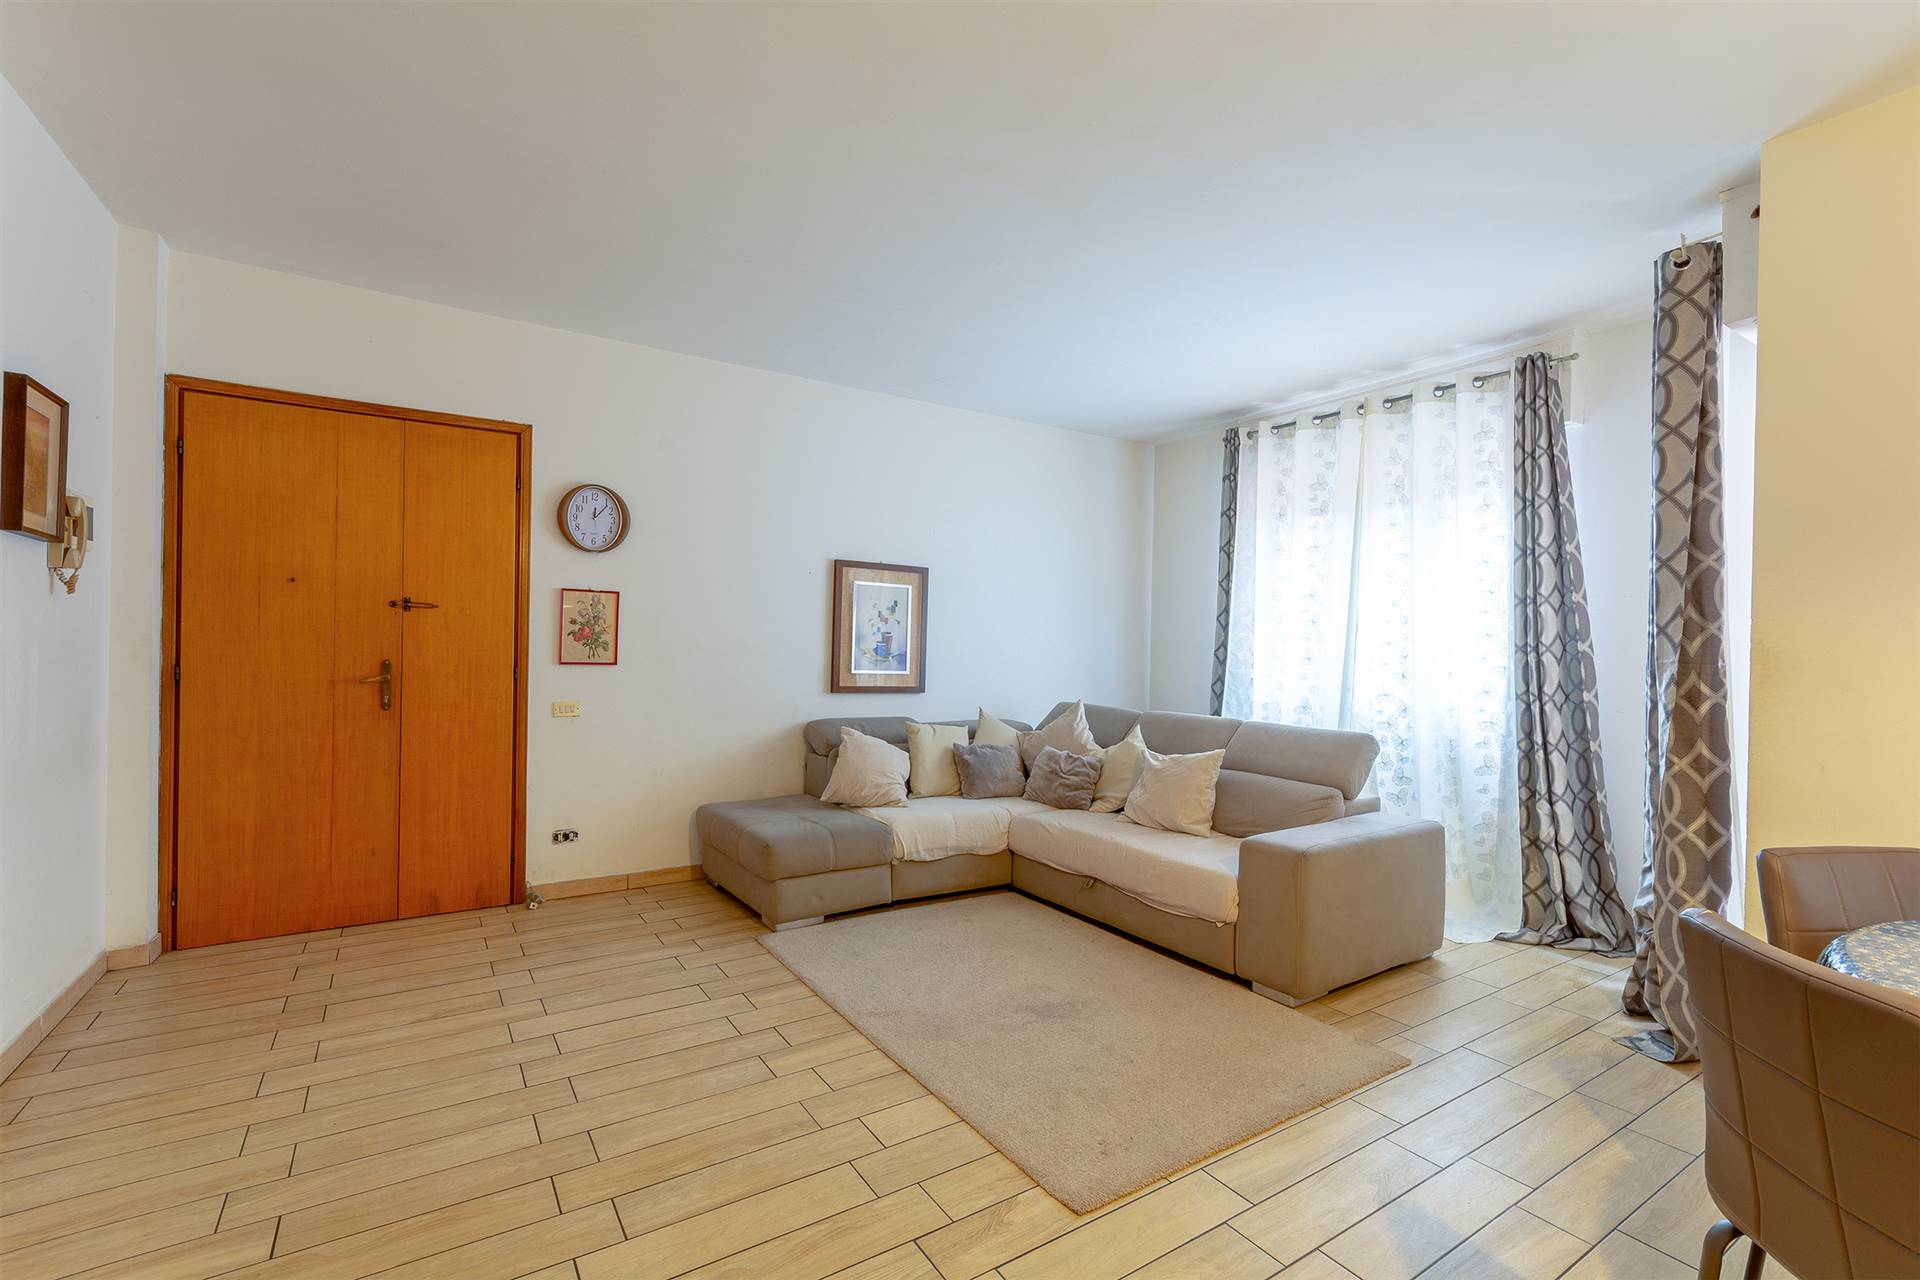 CAPALLE, CAMPI BISENZIO, Apartment for sale of 89 Sq. mt., Good condition, Heating Individual heating system, Energetic class: G, placed at 1° on 4, composed by: 4 Rooms, Little kitchen, , 2 Bedrooms,